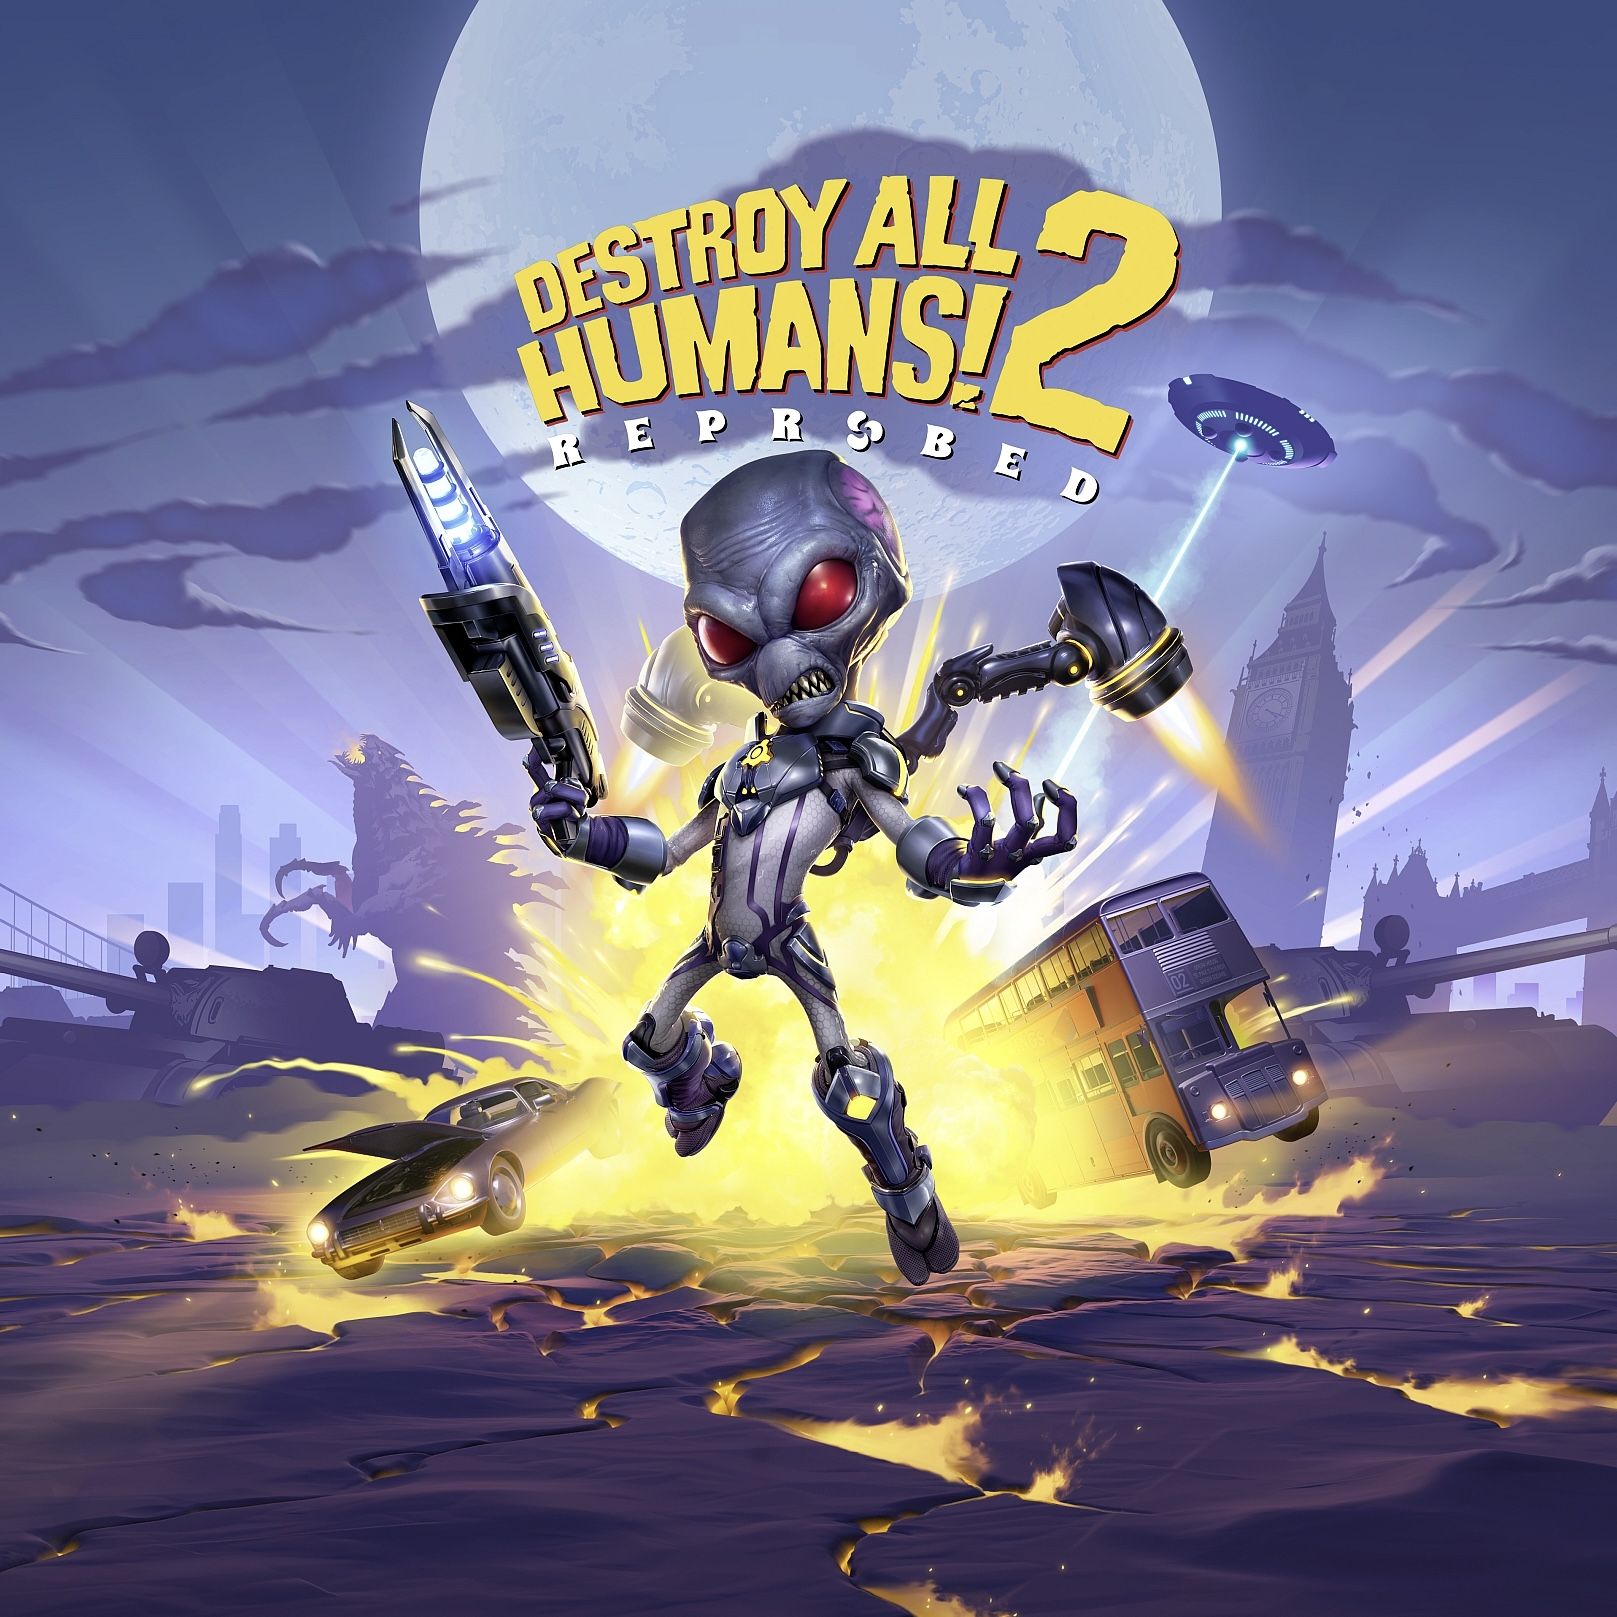 All humans 2 reprobed. Destroy all Humans 2 reprobed. Destroy all Humans! 2 - Reprobed (ps5). Игры на ПС. Destroy all Humans!.